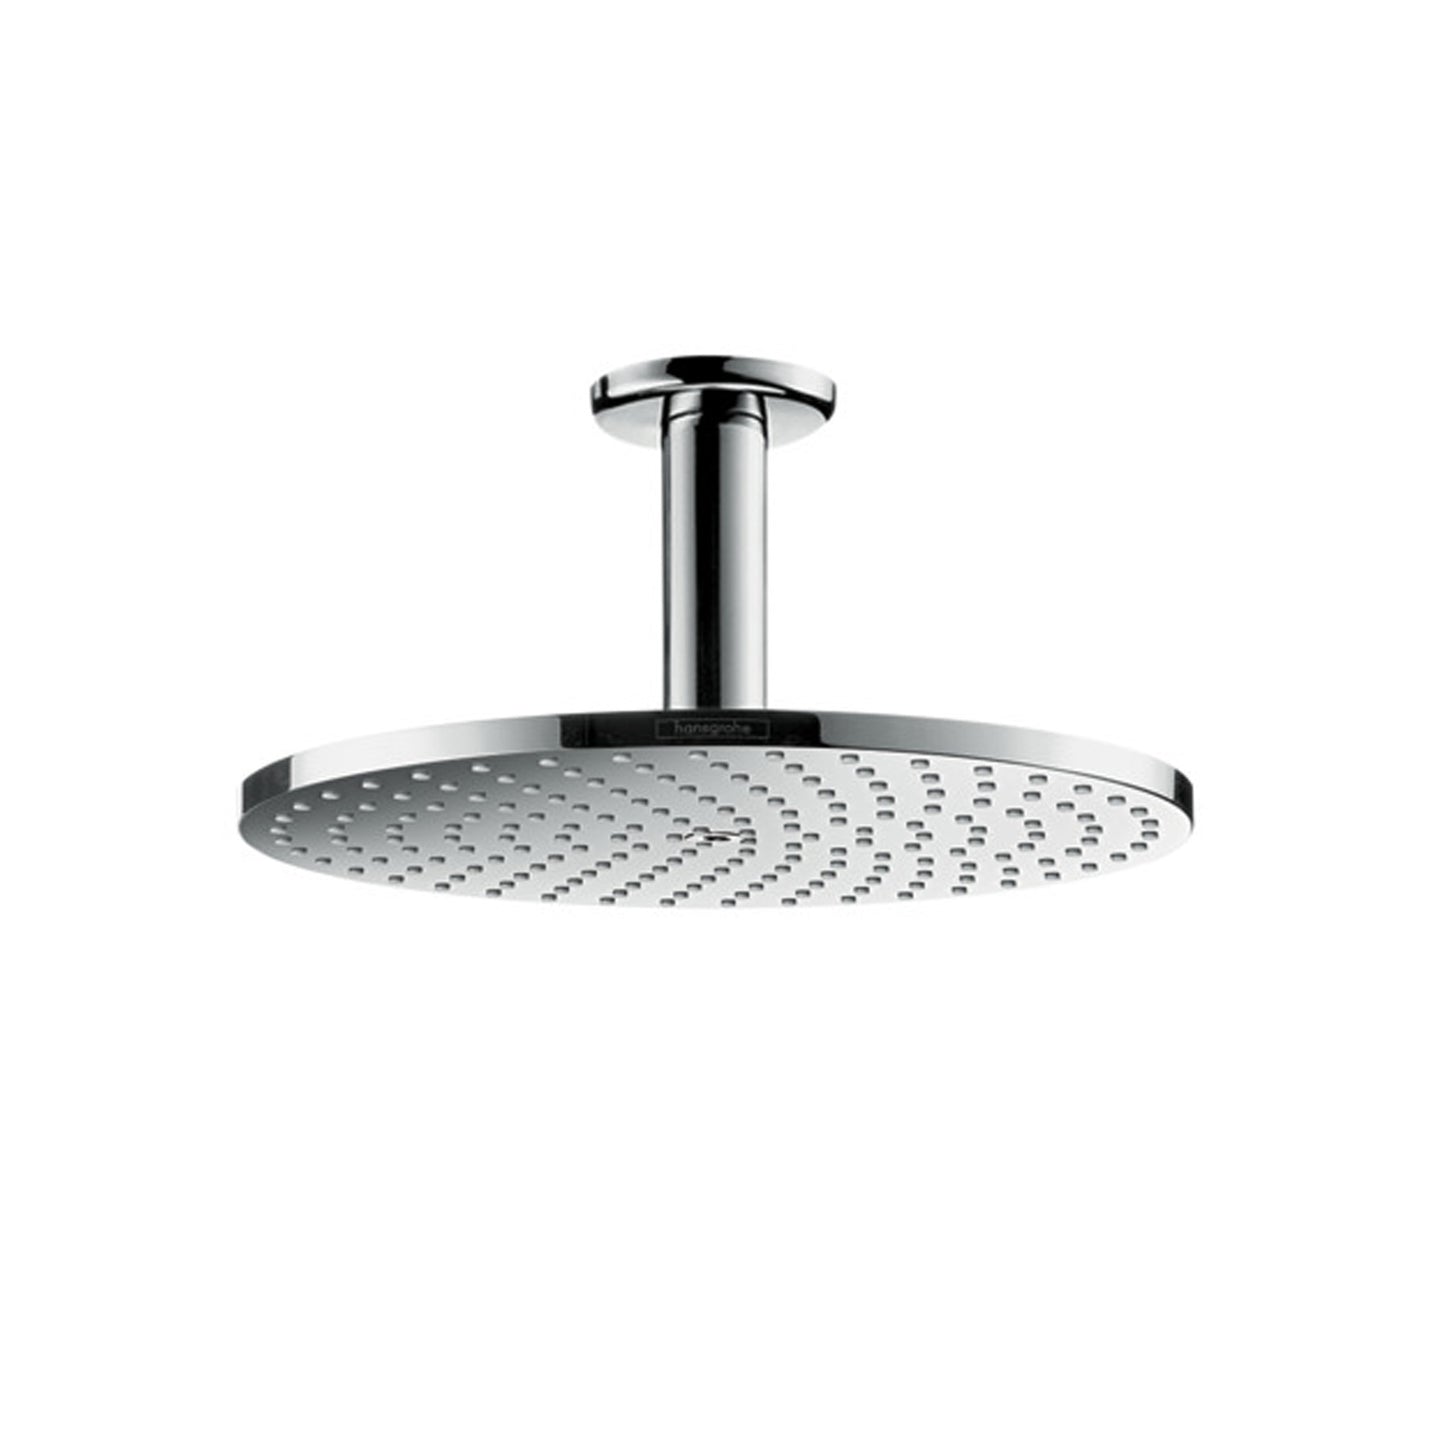 Hansgrohe Raindance S240 1jet overhead shower with ceiling connector 27620.000